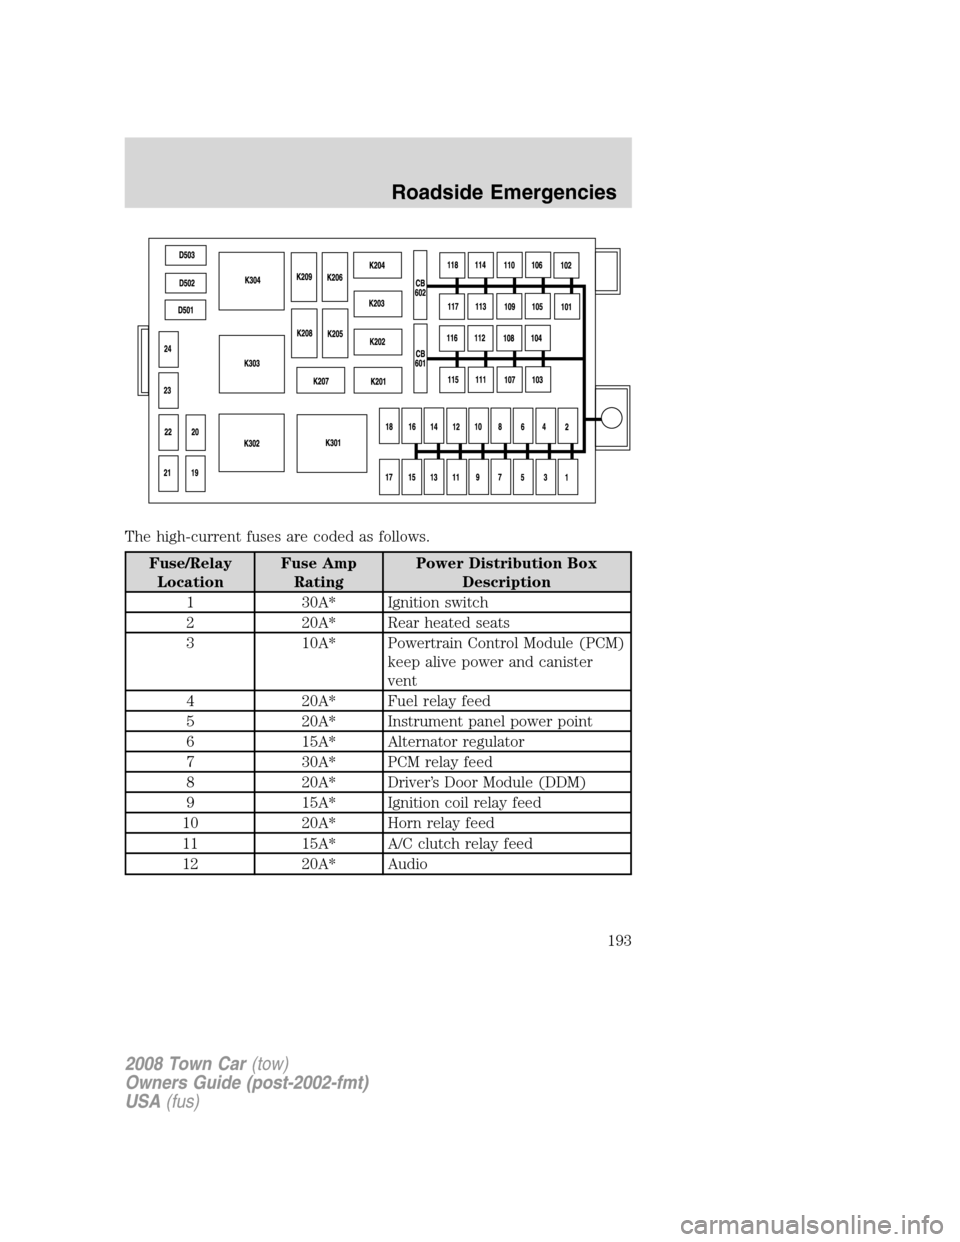 LINCOLN TOWN CAR 2008  Owners Manual The high-current fuses are coded as follows.
Fuse/Relay
LocationFuse Amp
RatingPower Distribution Box
Description
1 30A* Ignition switch
2 20A* Rear heated seats
3 10A* Powertrain Control Module (PCM)